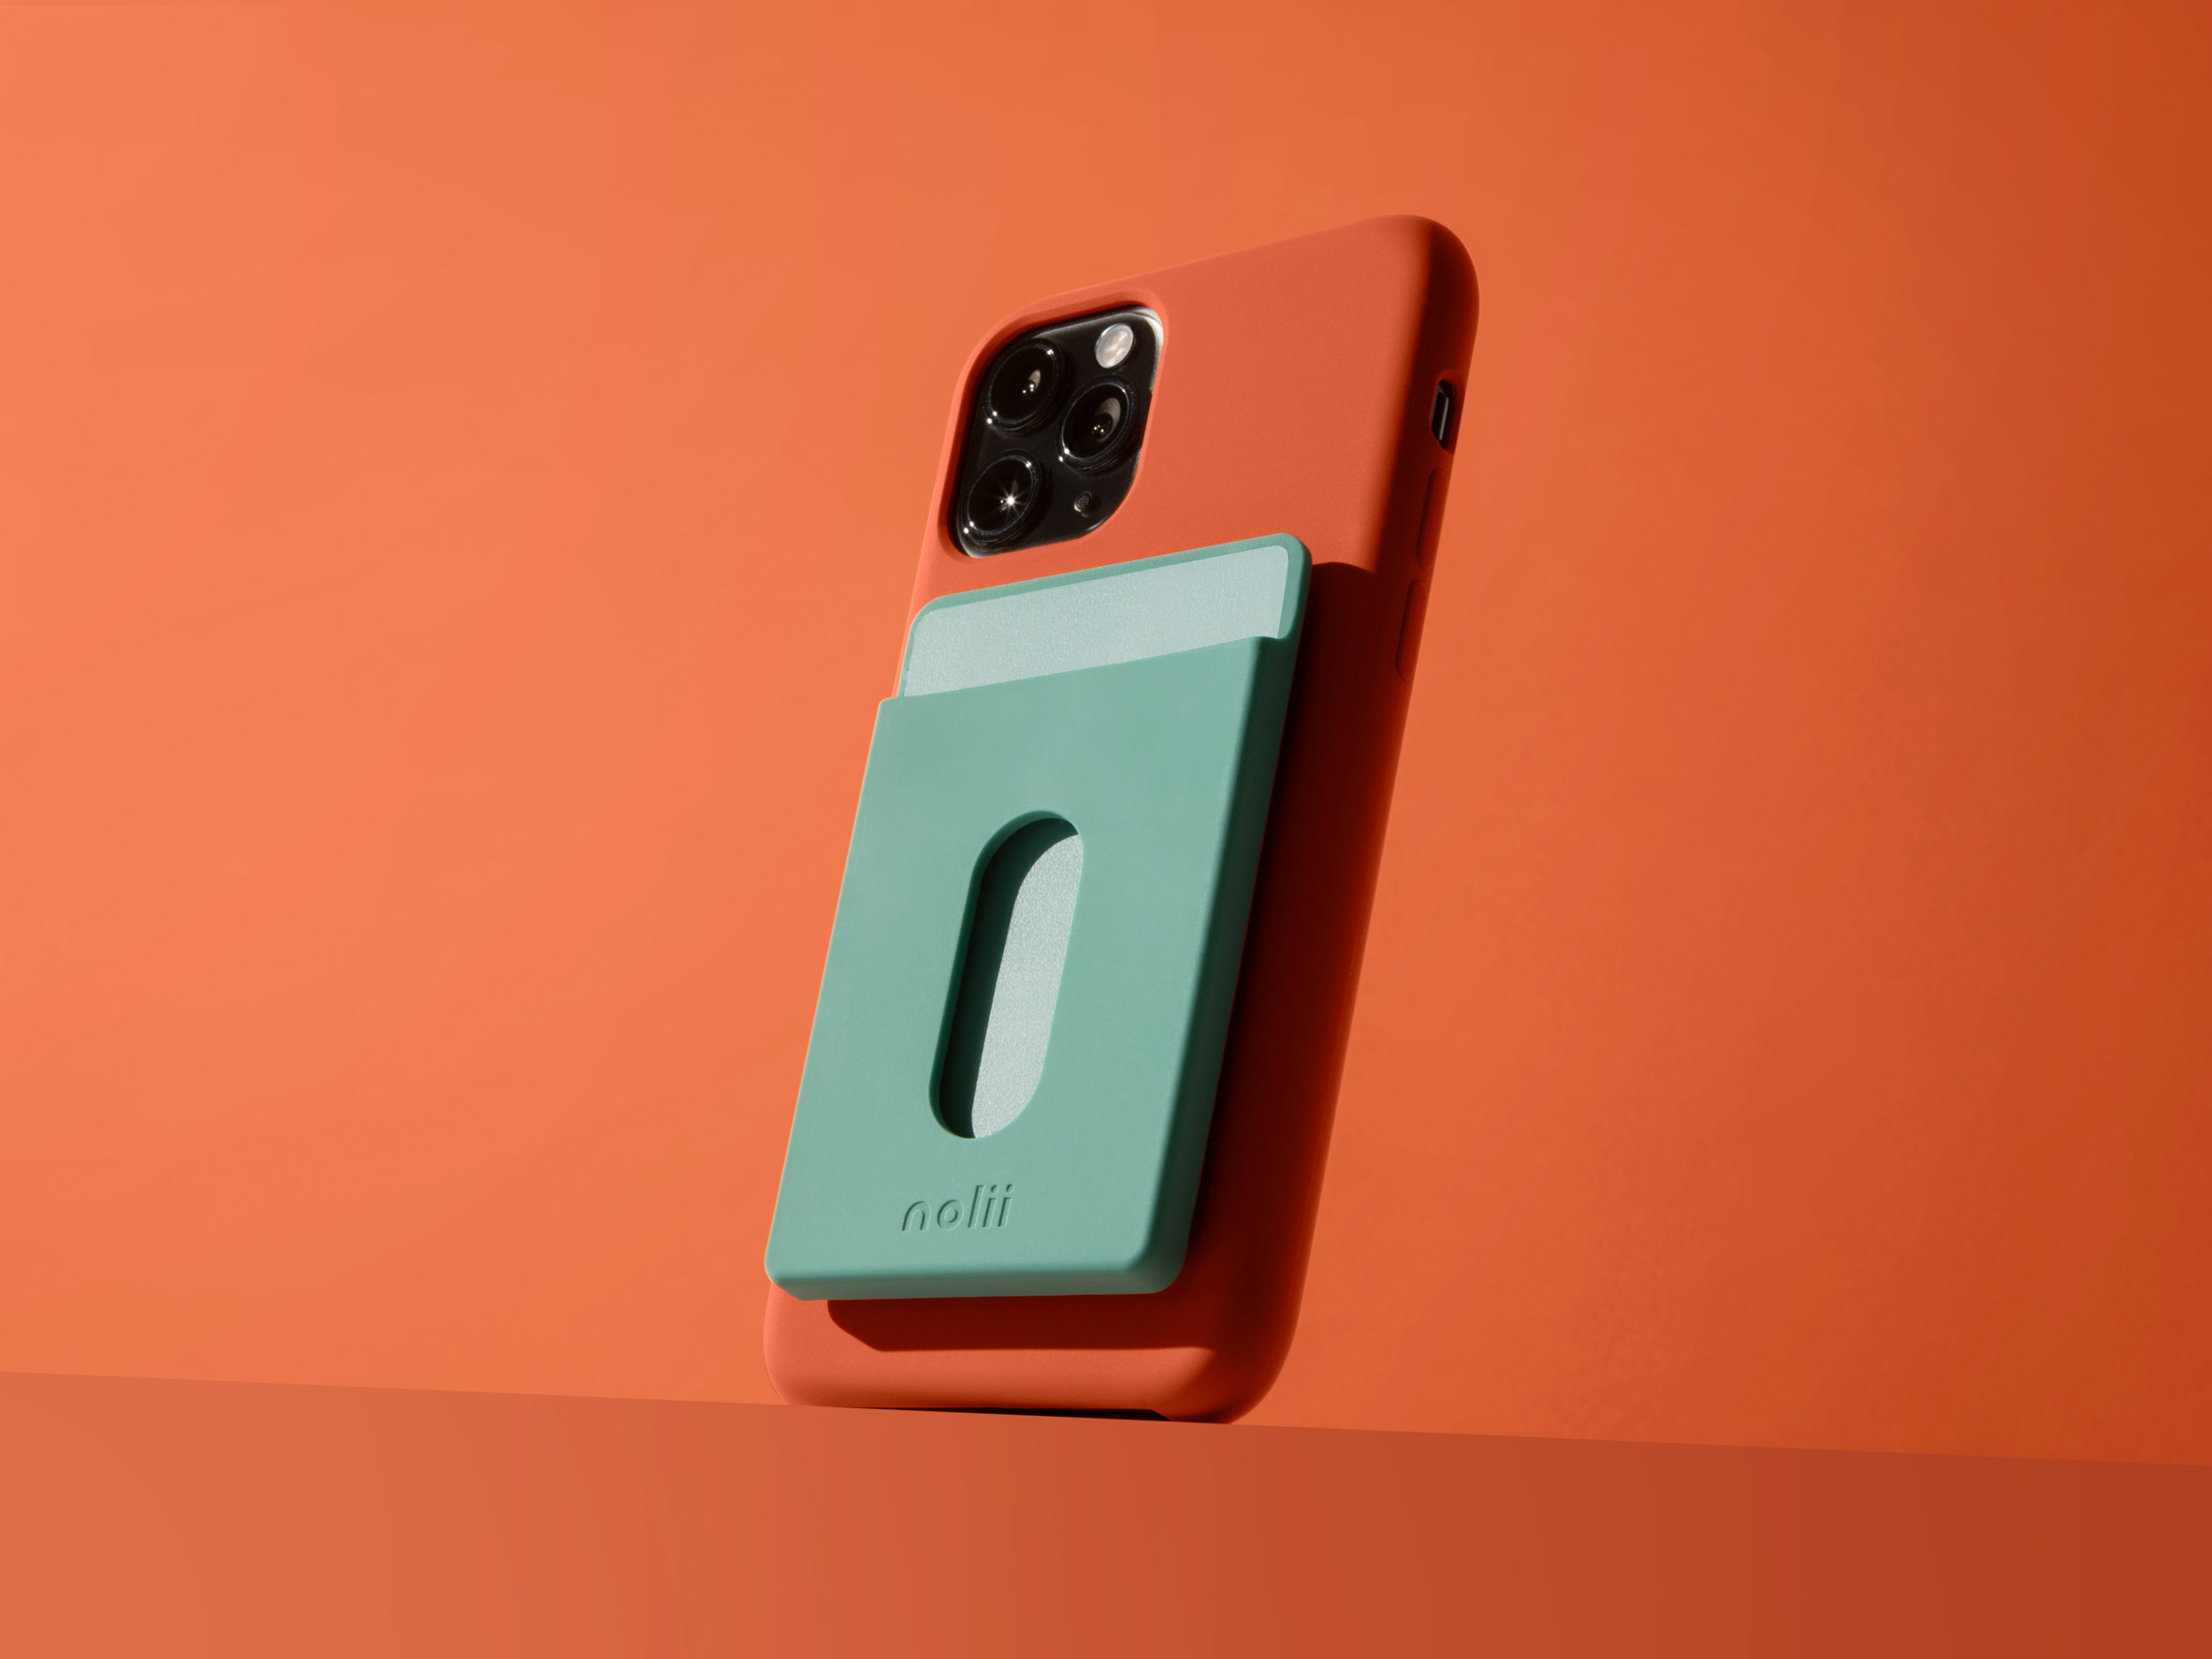 Nolii launches first collection of technology and smartphone accessories